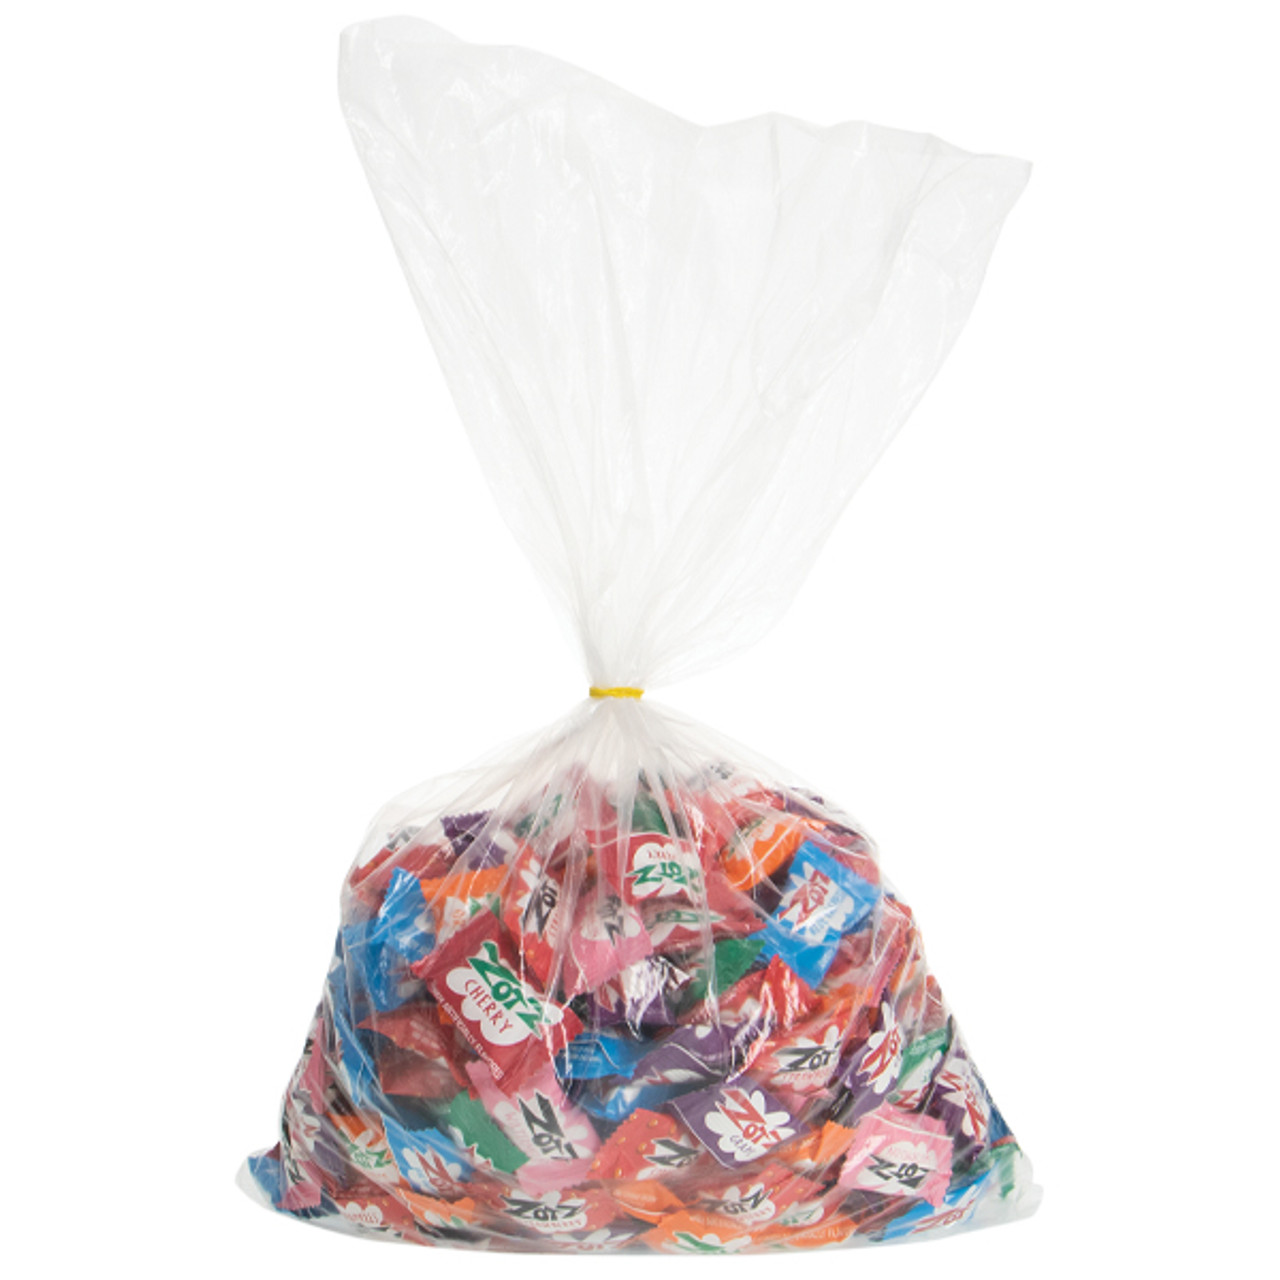 I REMEMBER WHEN you could buy a bag of lollies for 20 cents